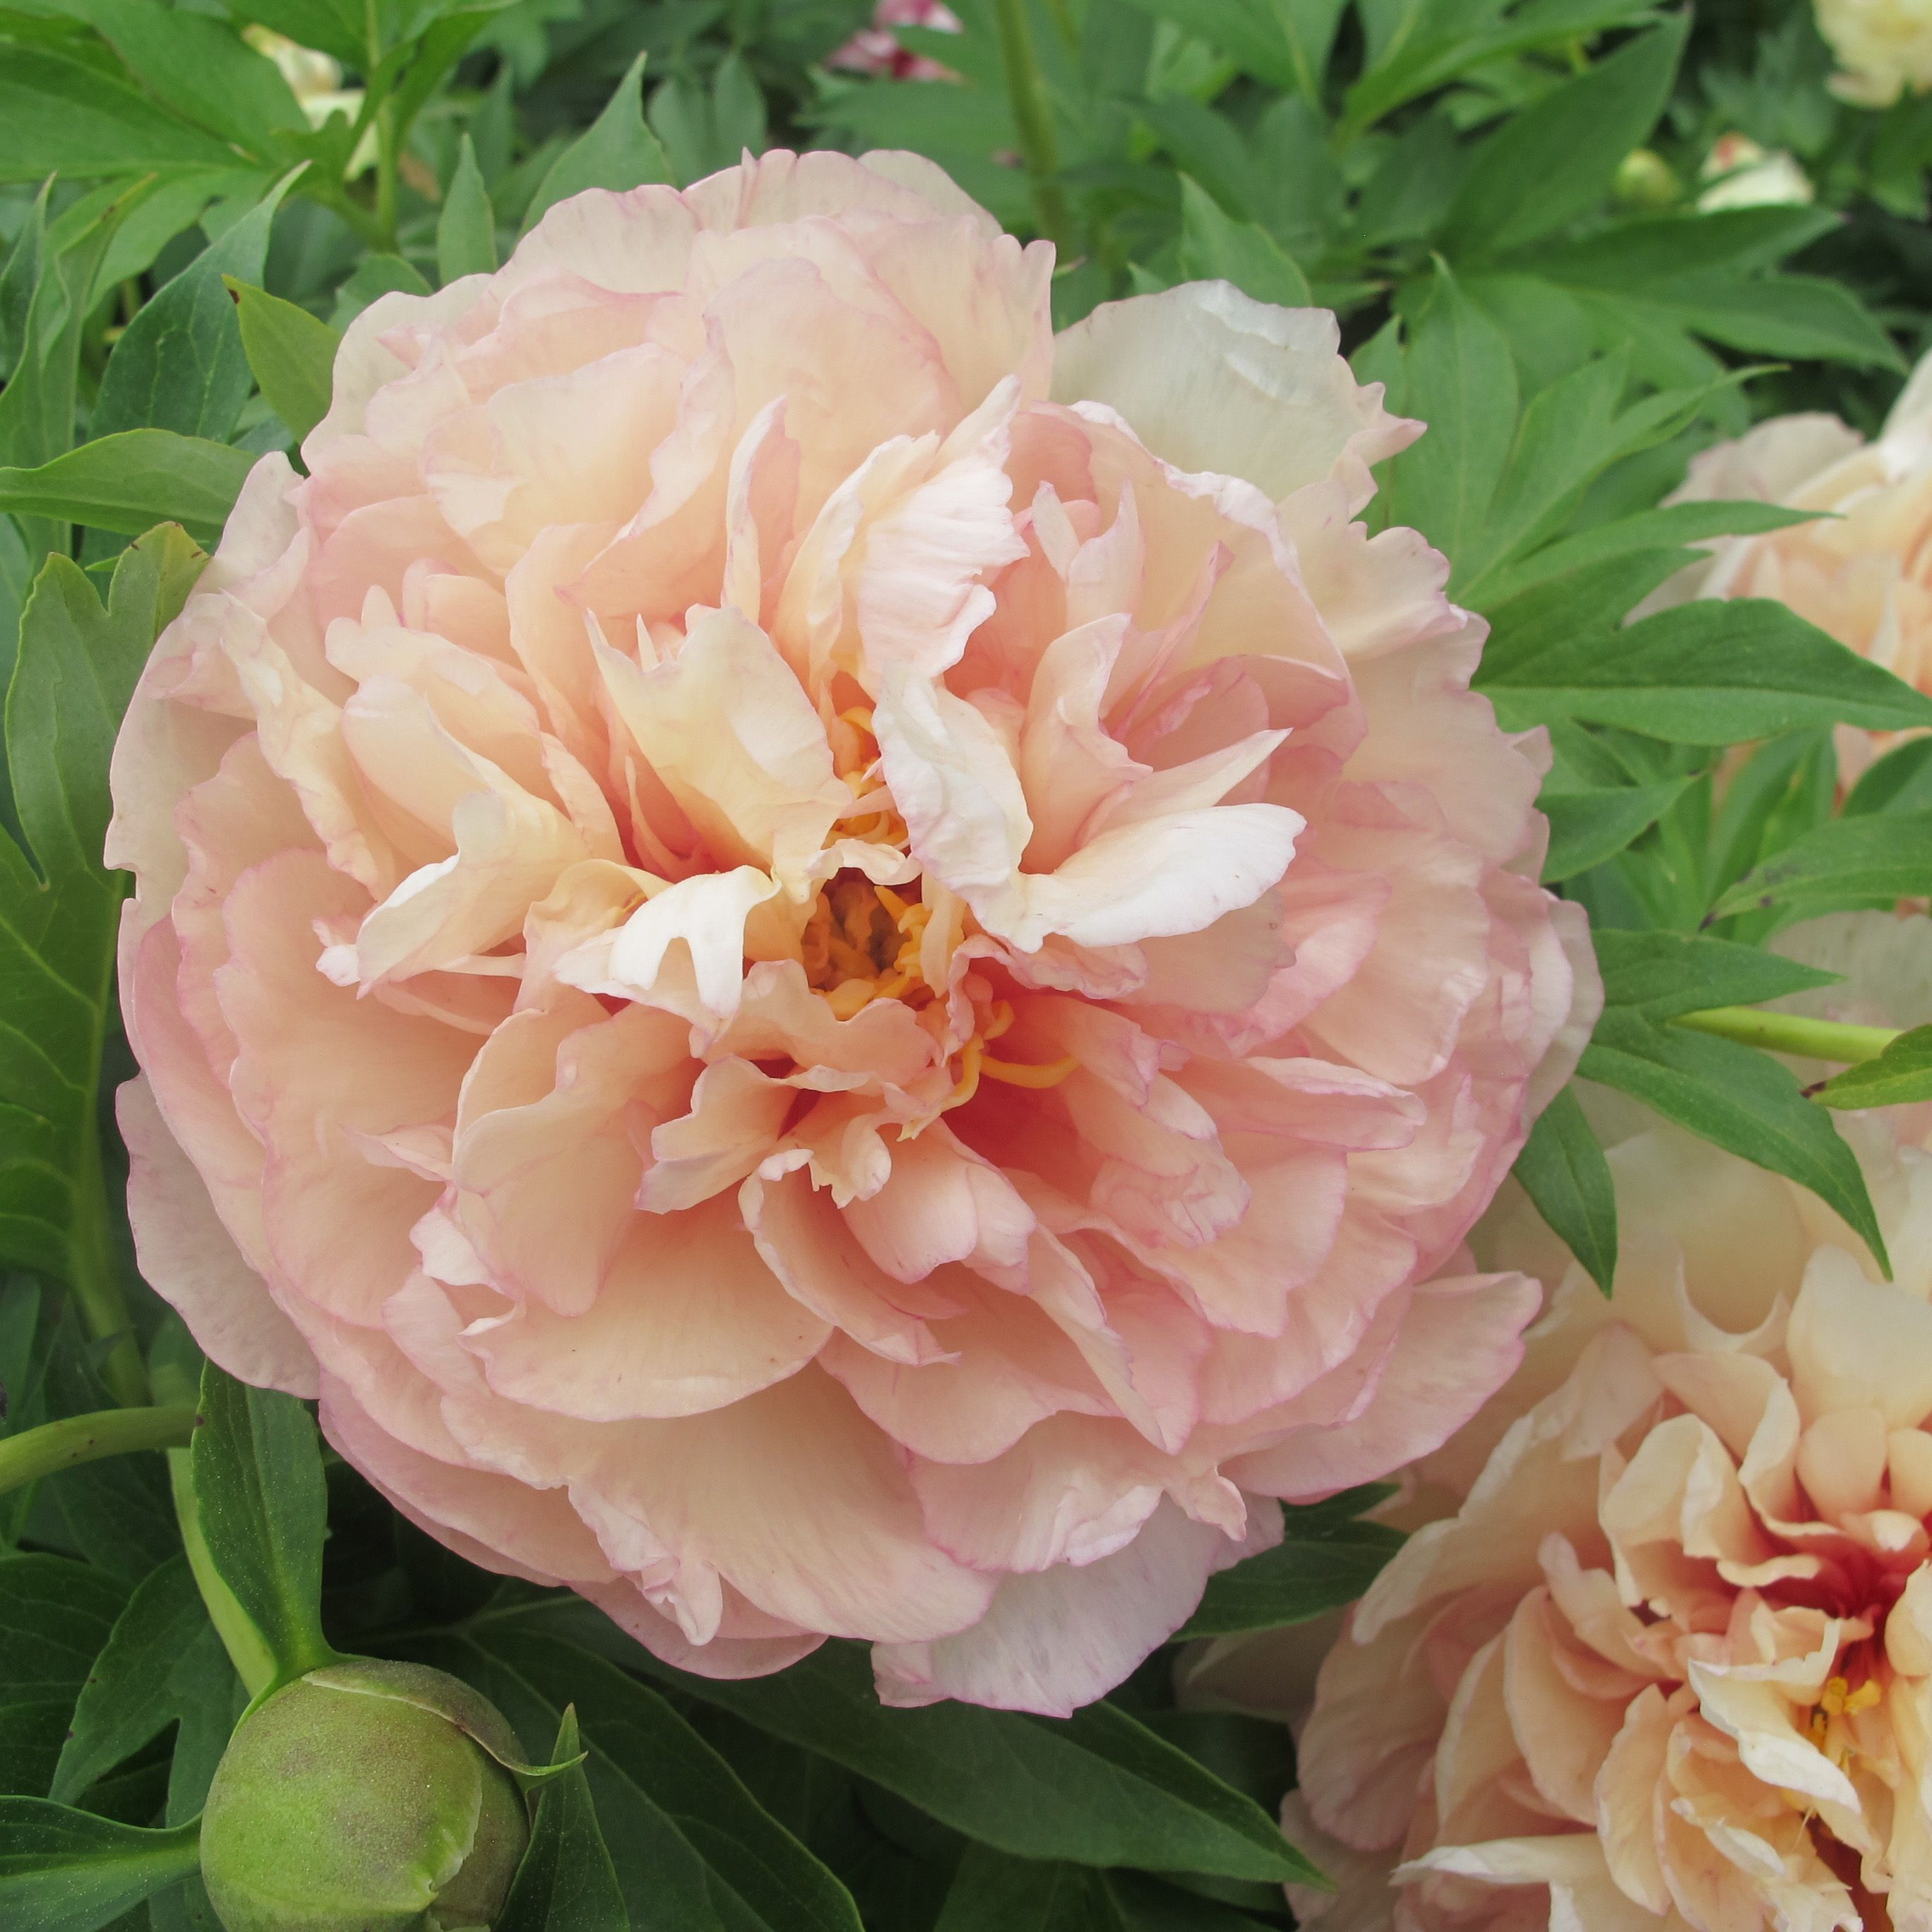 images/plants/paeonia/pae-truly-scrumptious/pae-truly-scrumptious-0013.JPG